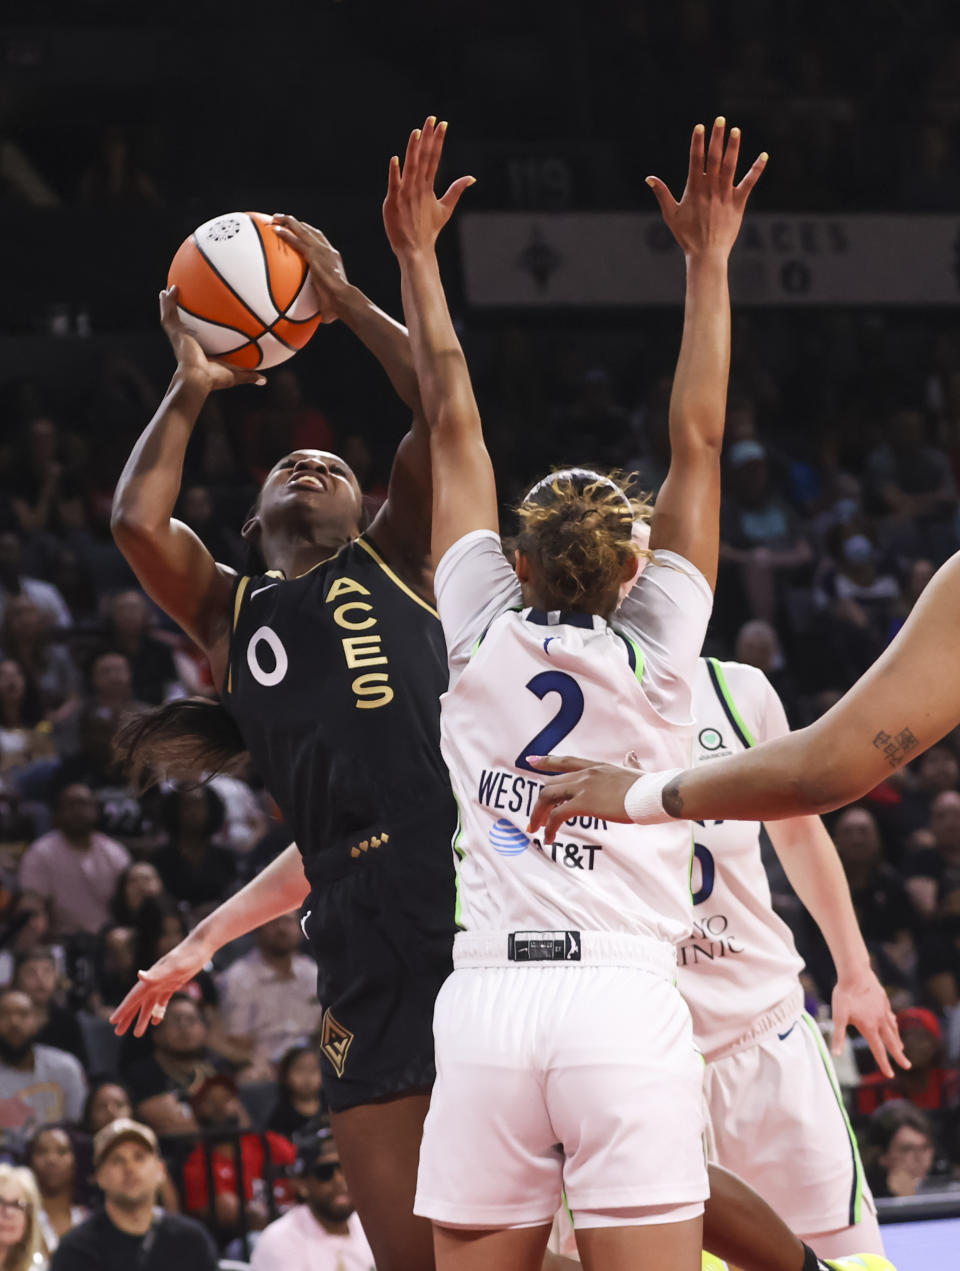 Las Vegas Aces guard Jackie Young (0) shoots around Minnesota Lynx guard Evina Westbrook (2) during the second half of a WNBA basketball game Sunday, June 19, 2022, in Las Vegas. (Chase Stevens/Las Vegas Review-Journal via AP)